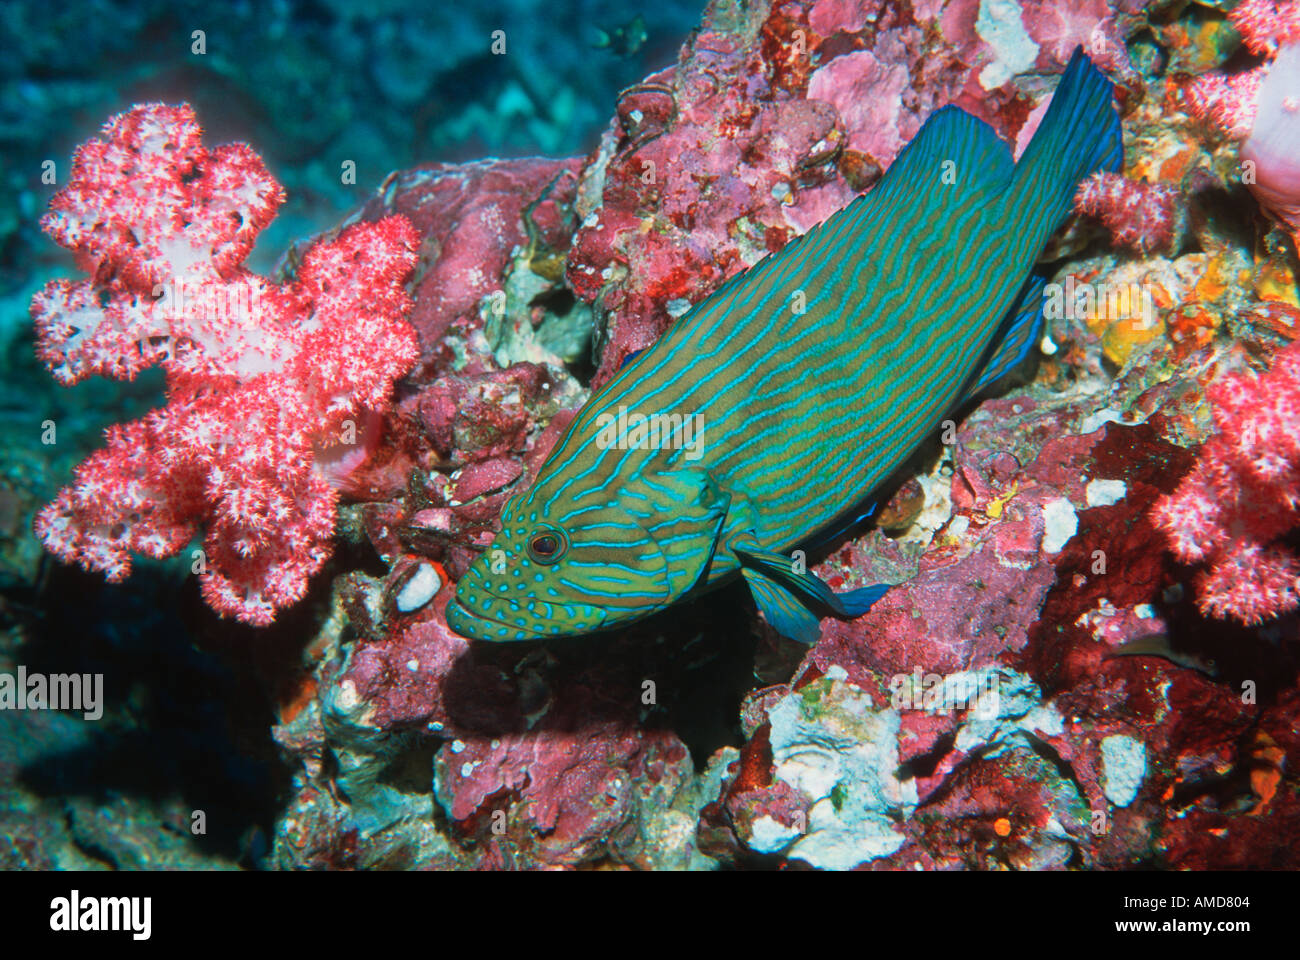 Bluelined hind with soft corals Andaman Sea Thailand Stock Photo